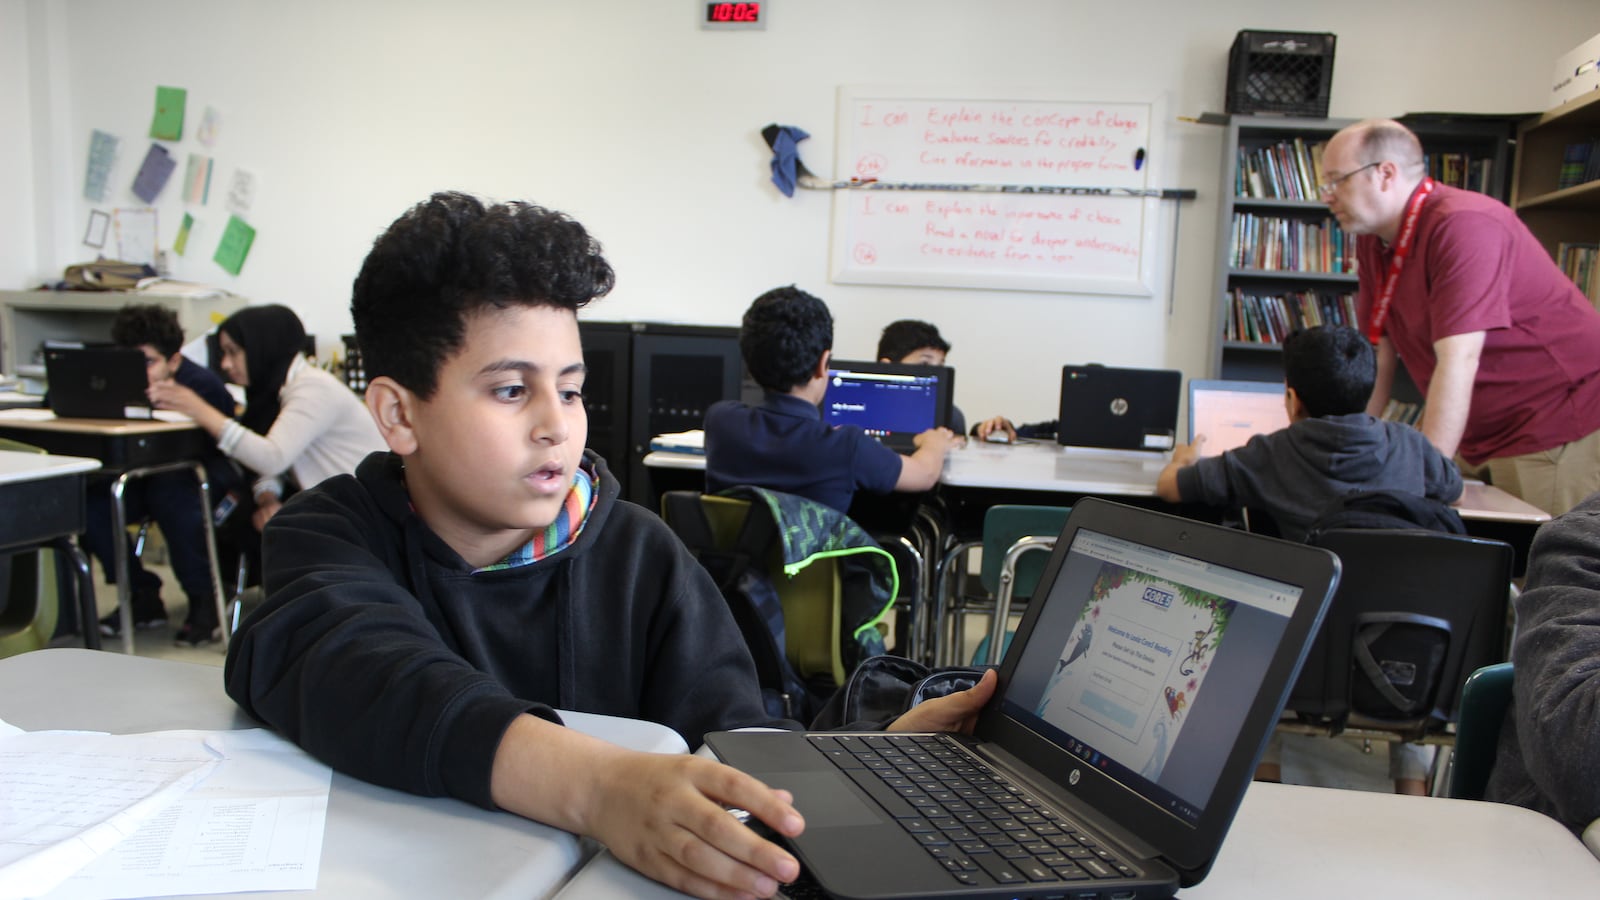 A student at Bridge Academy West in Detroit shows off a computer program designed for students who speak English as a second language.